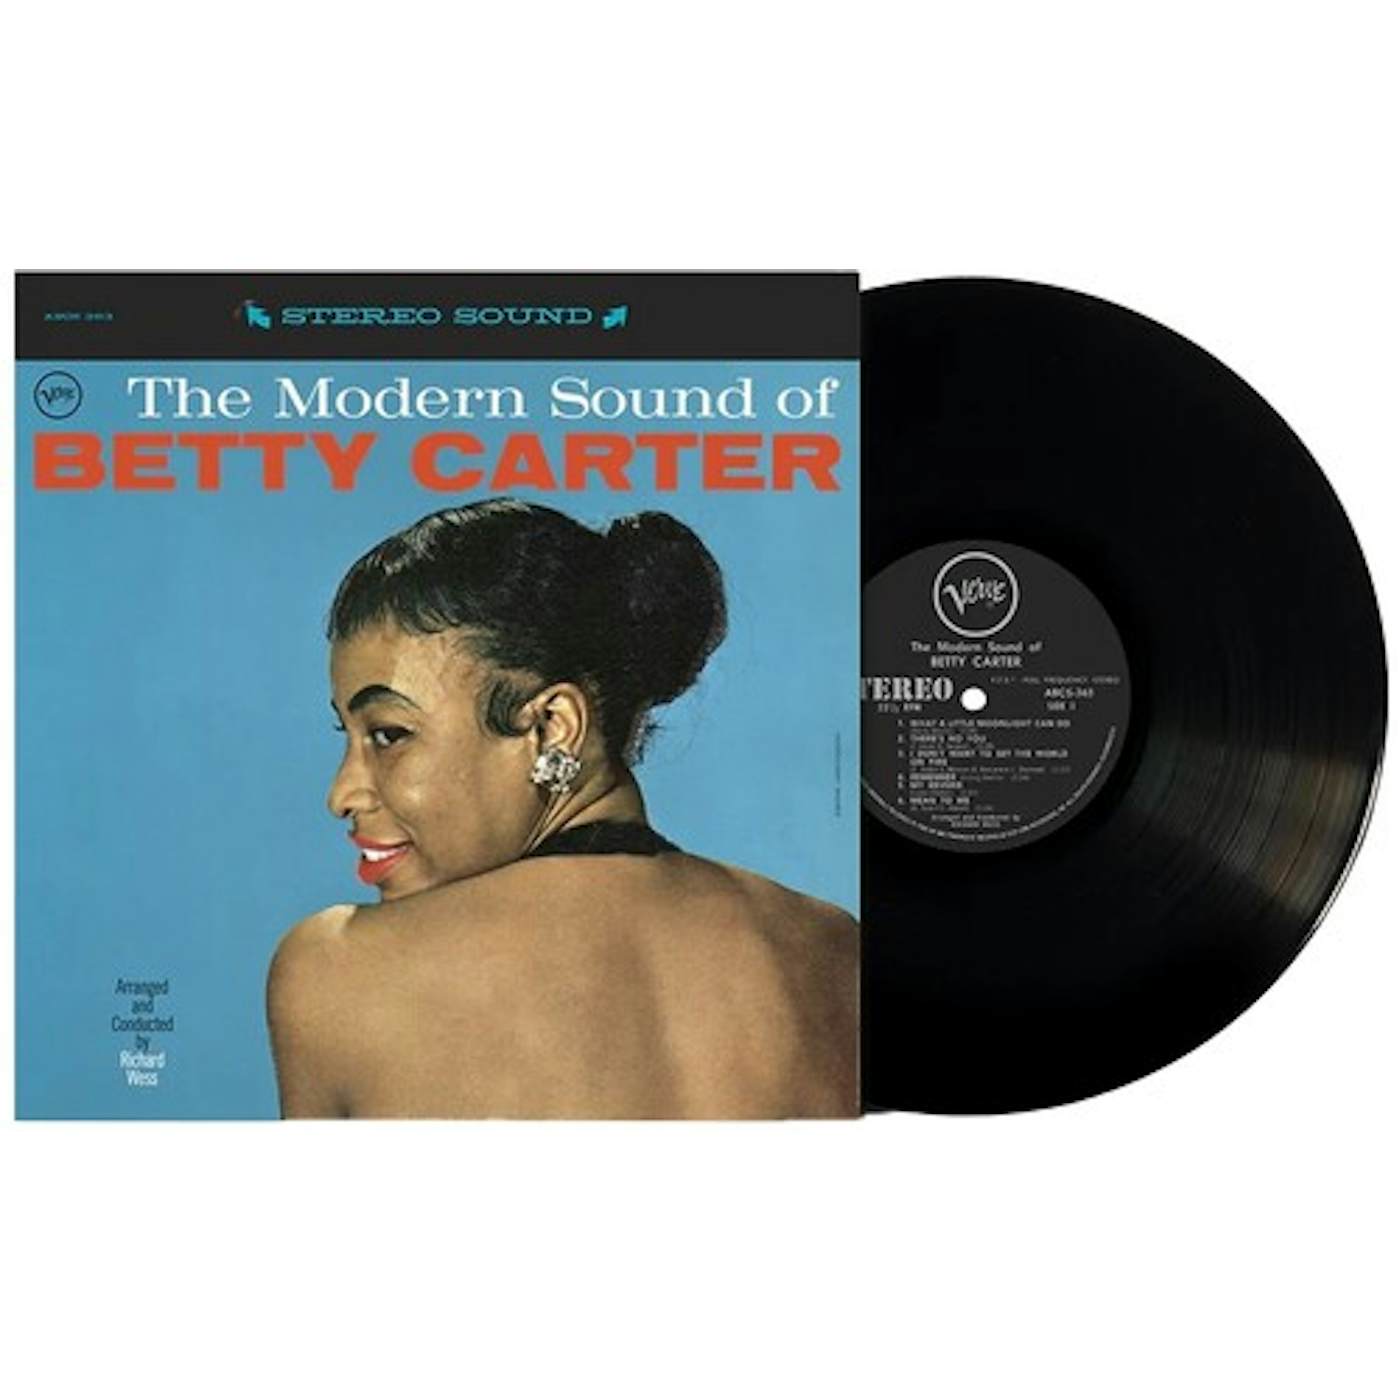 MODERN SOUND OF BETTY CARTER (VERVE BY REQUEST) Vinyl Record